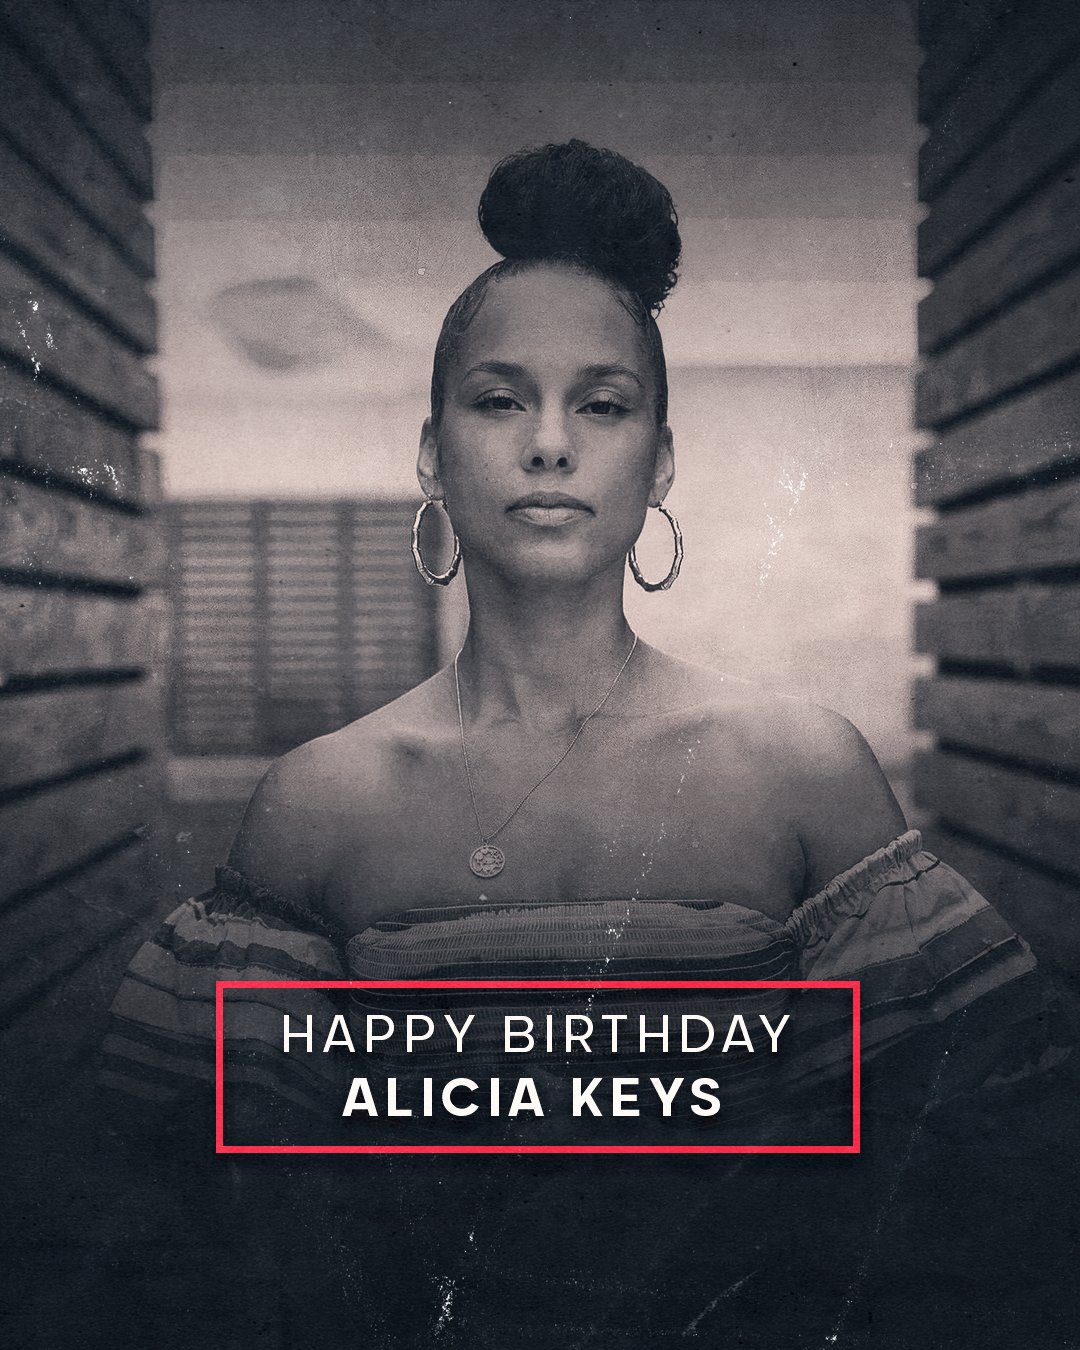 This girl is always on fire! Soulful, stylish, powerful. Sheer quality. Happy birthday Alicia Keys. 